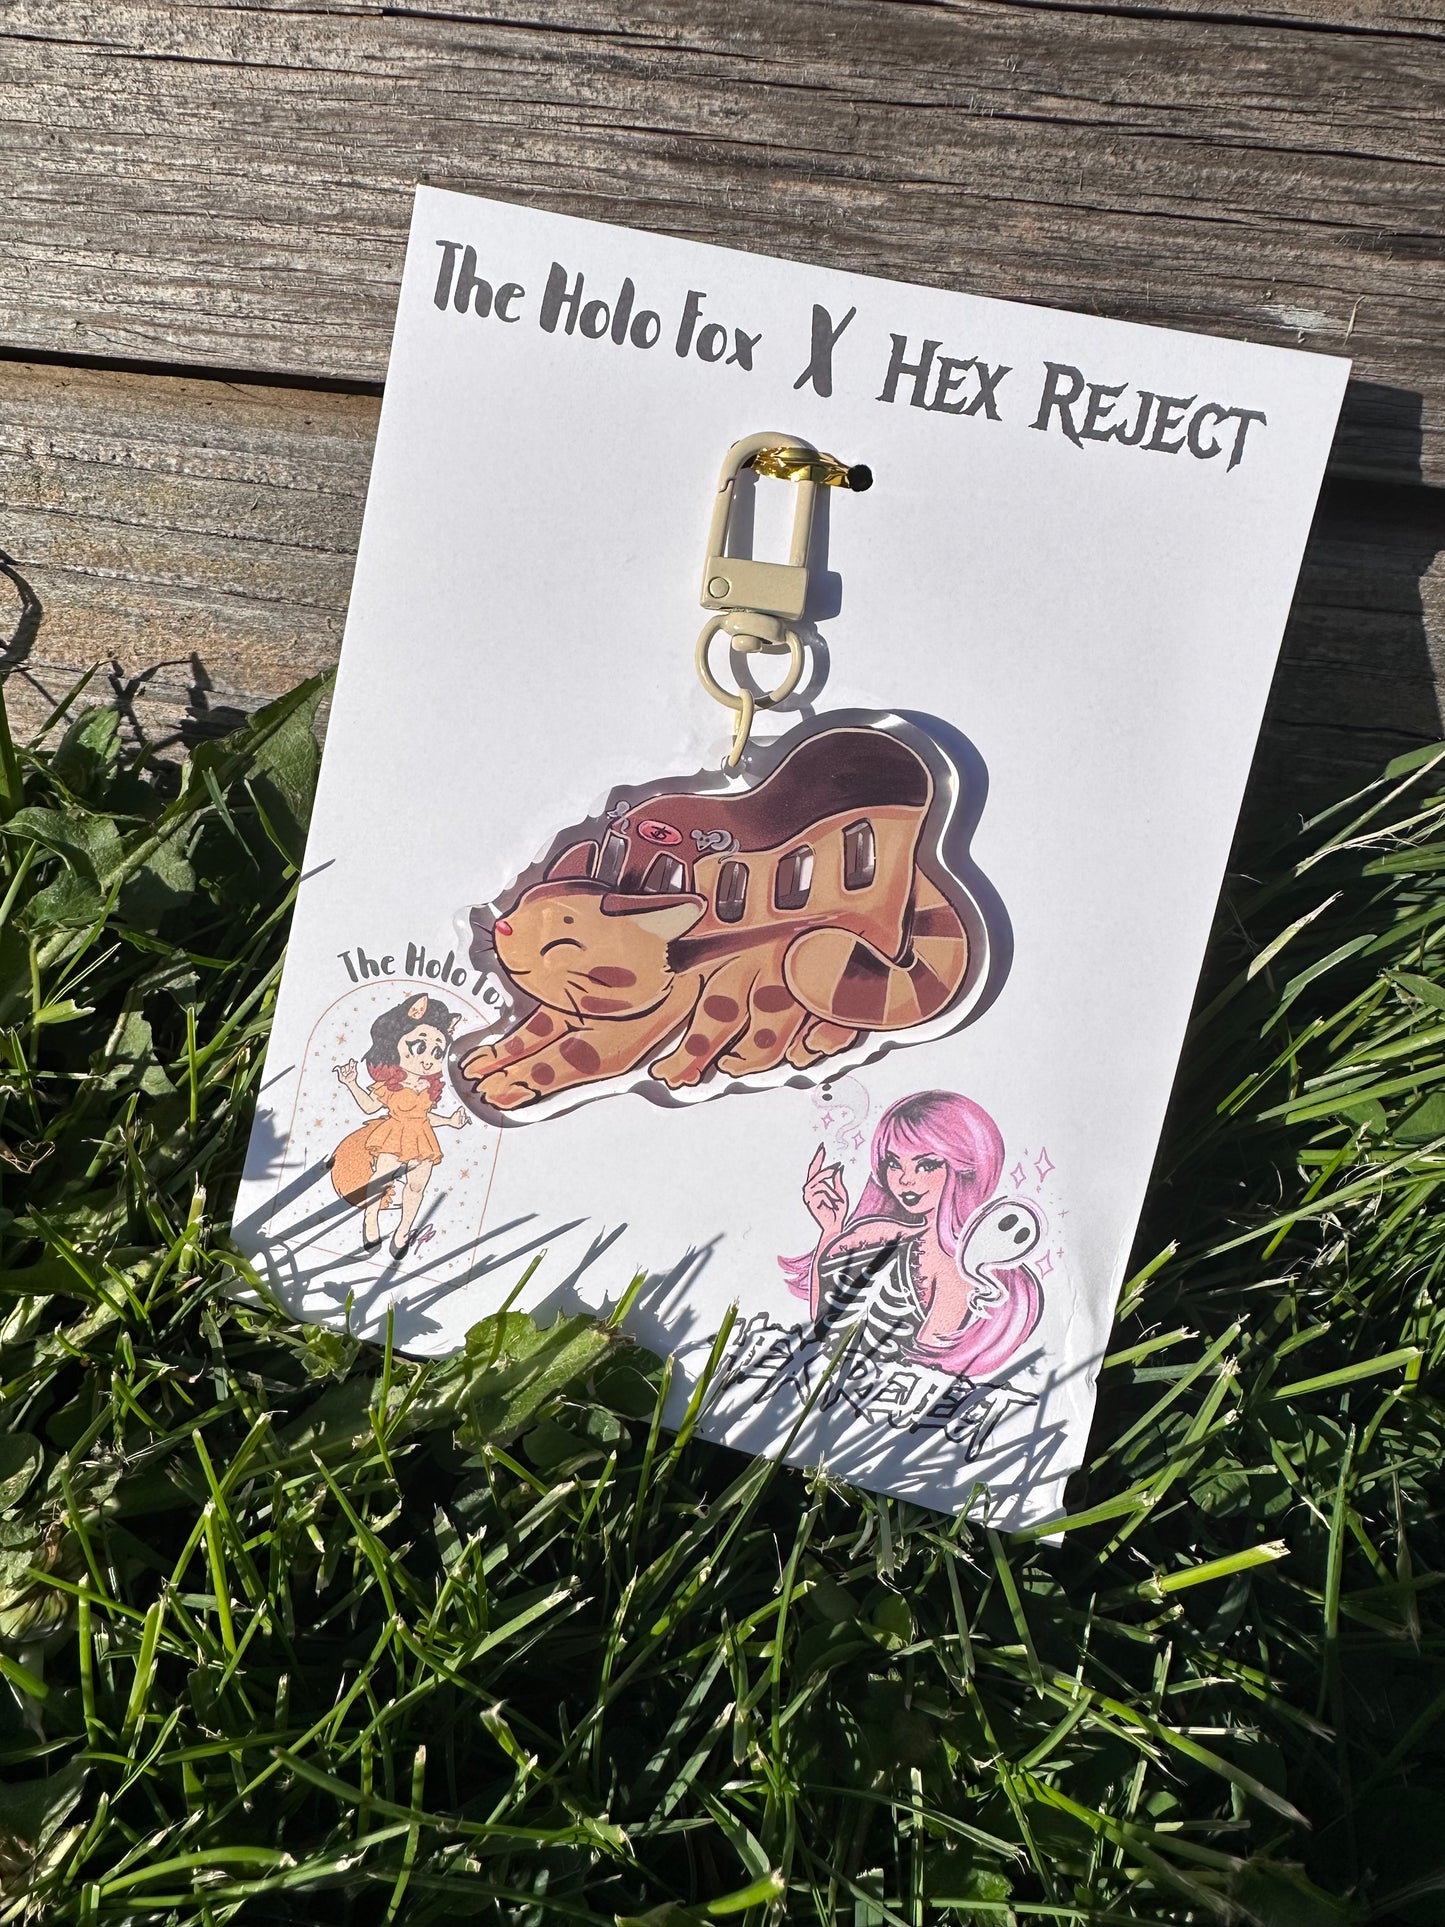 The Holo Fox X Hex Reject Anime keychains